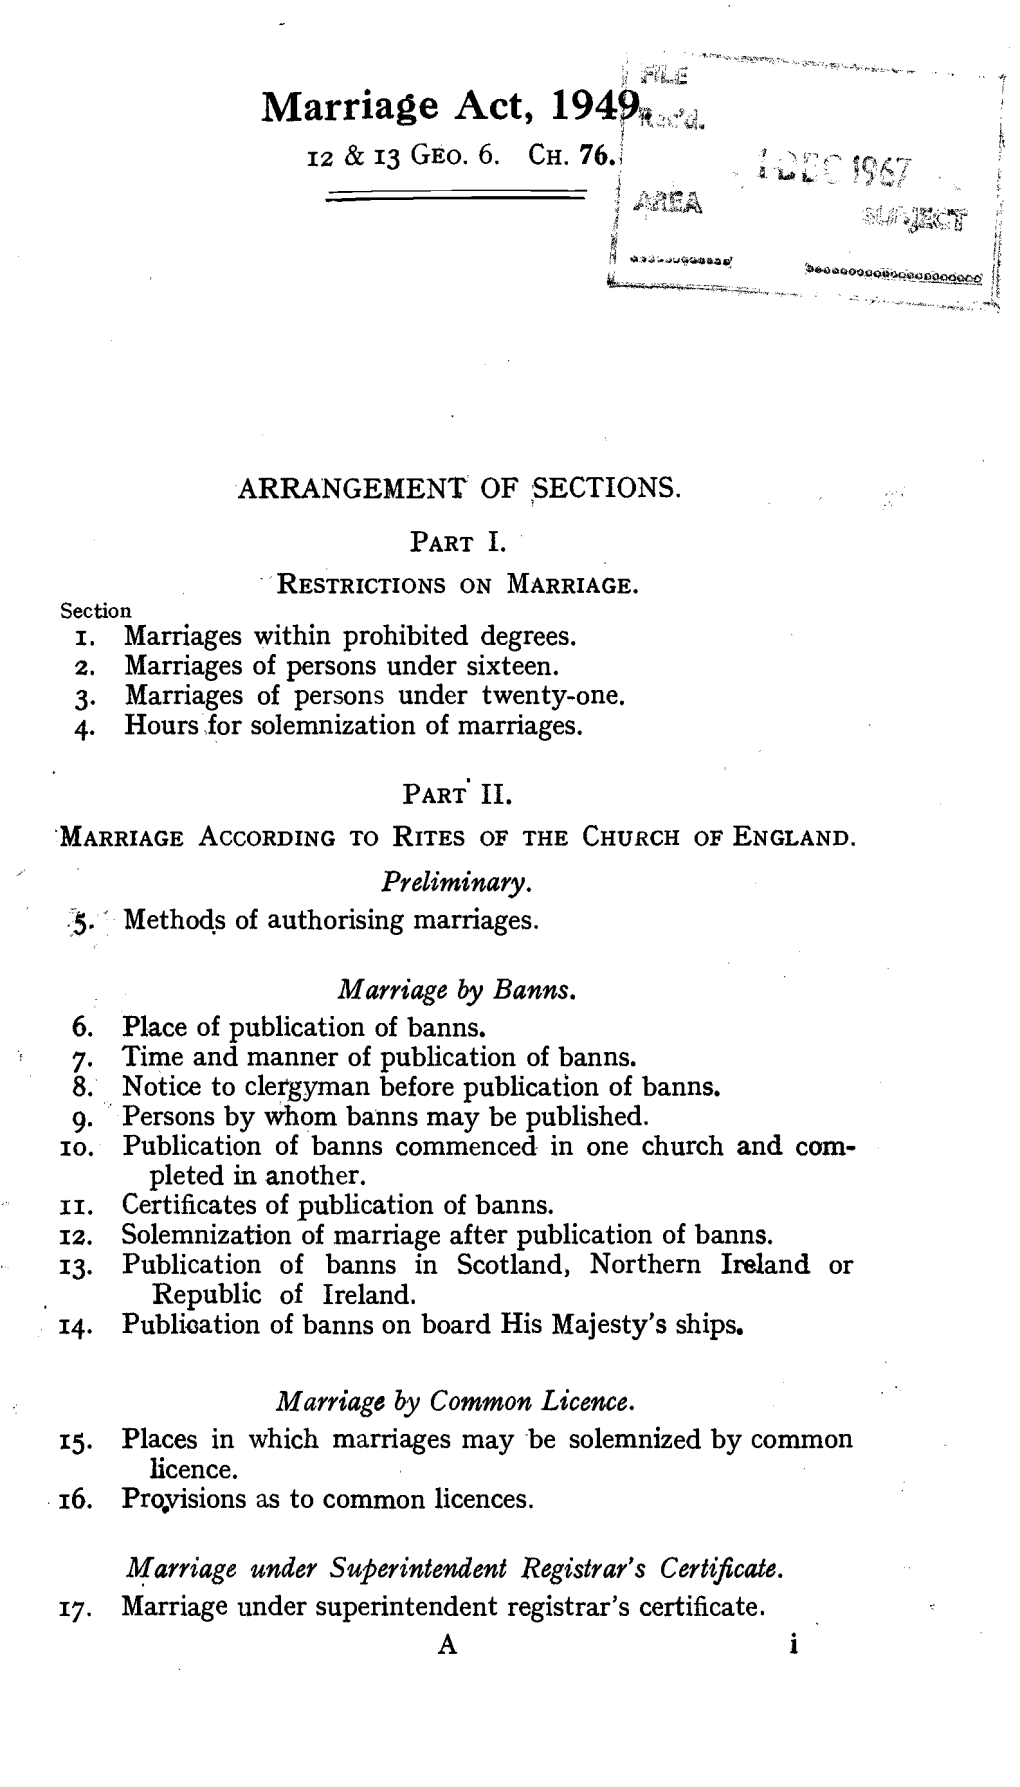 Marriage Act, 1949... { 12 & 13 GEO